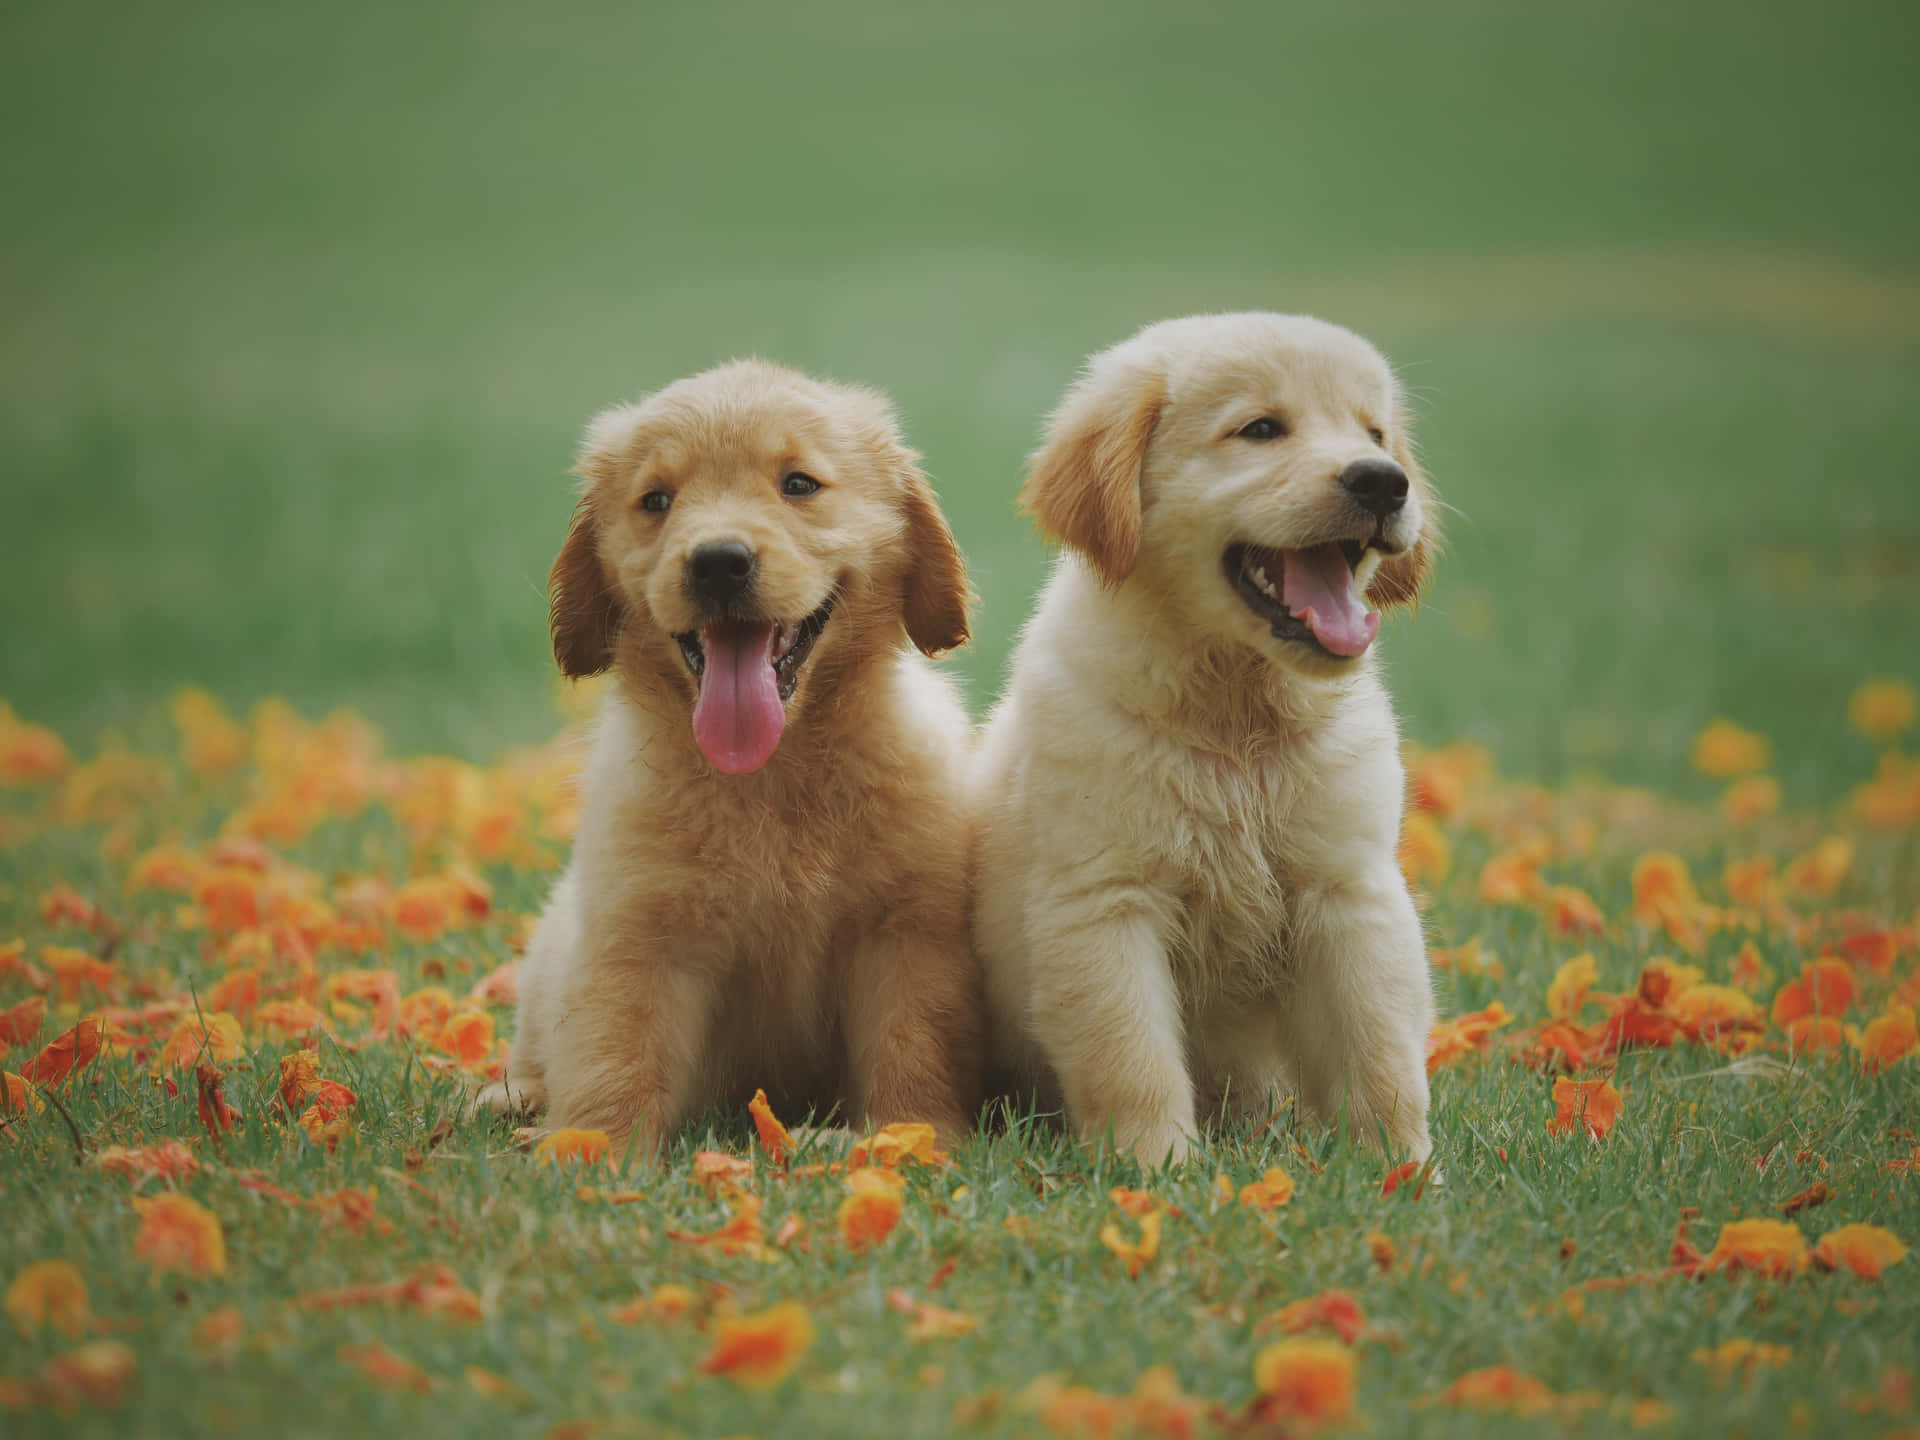 "Awww! These smiley puppies are so adorable!"